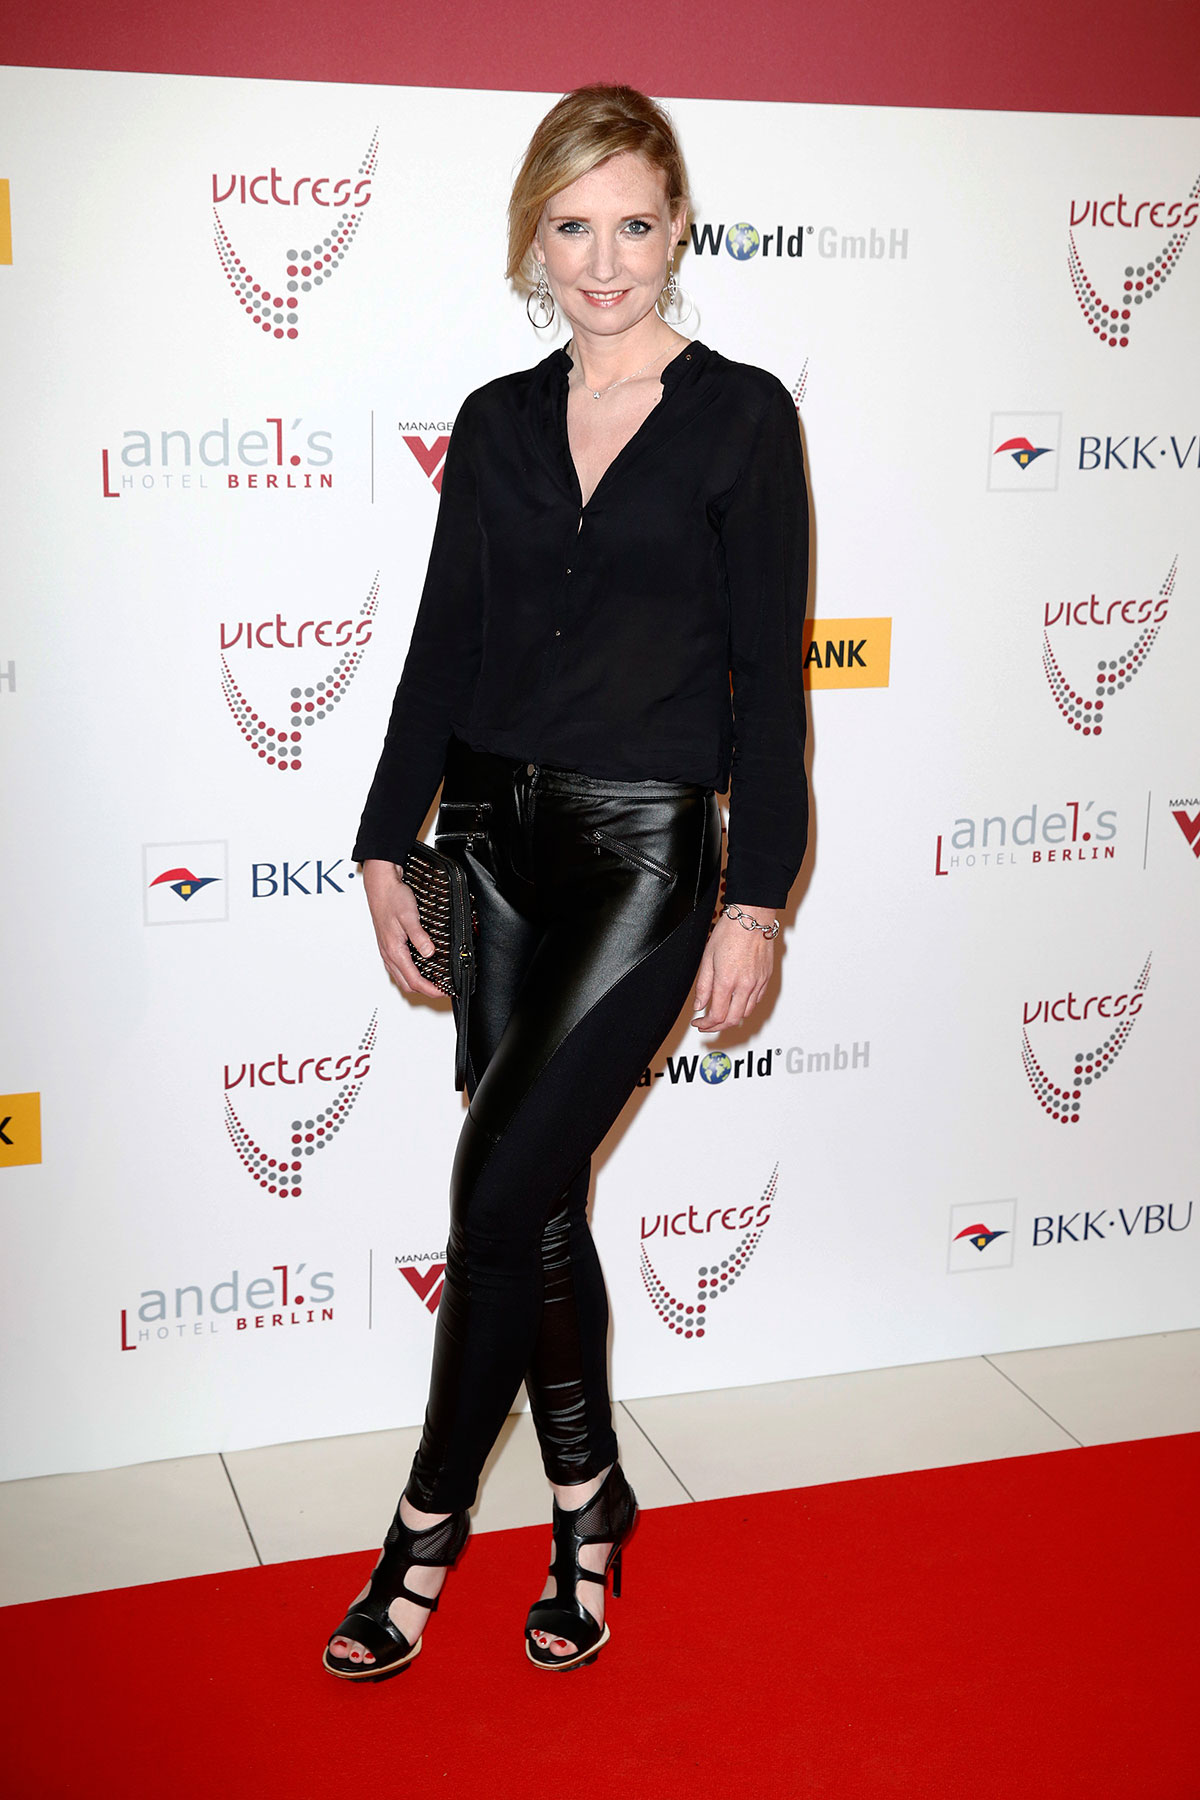 Jette Joop attends the 9th Victress Awards Gala